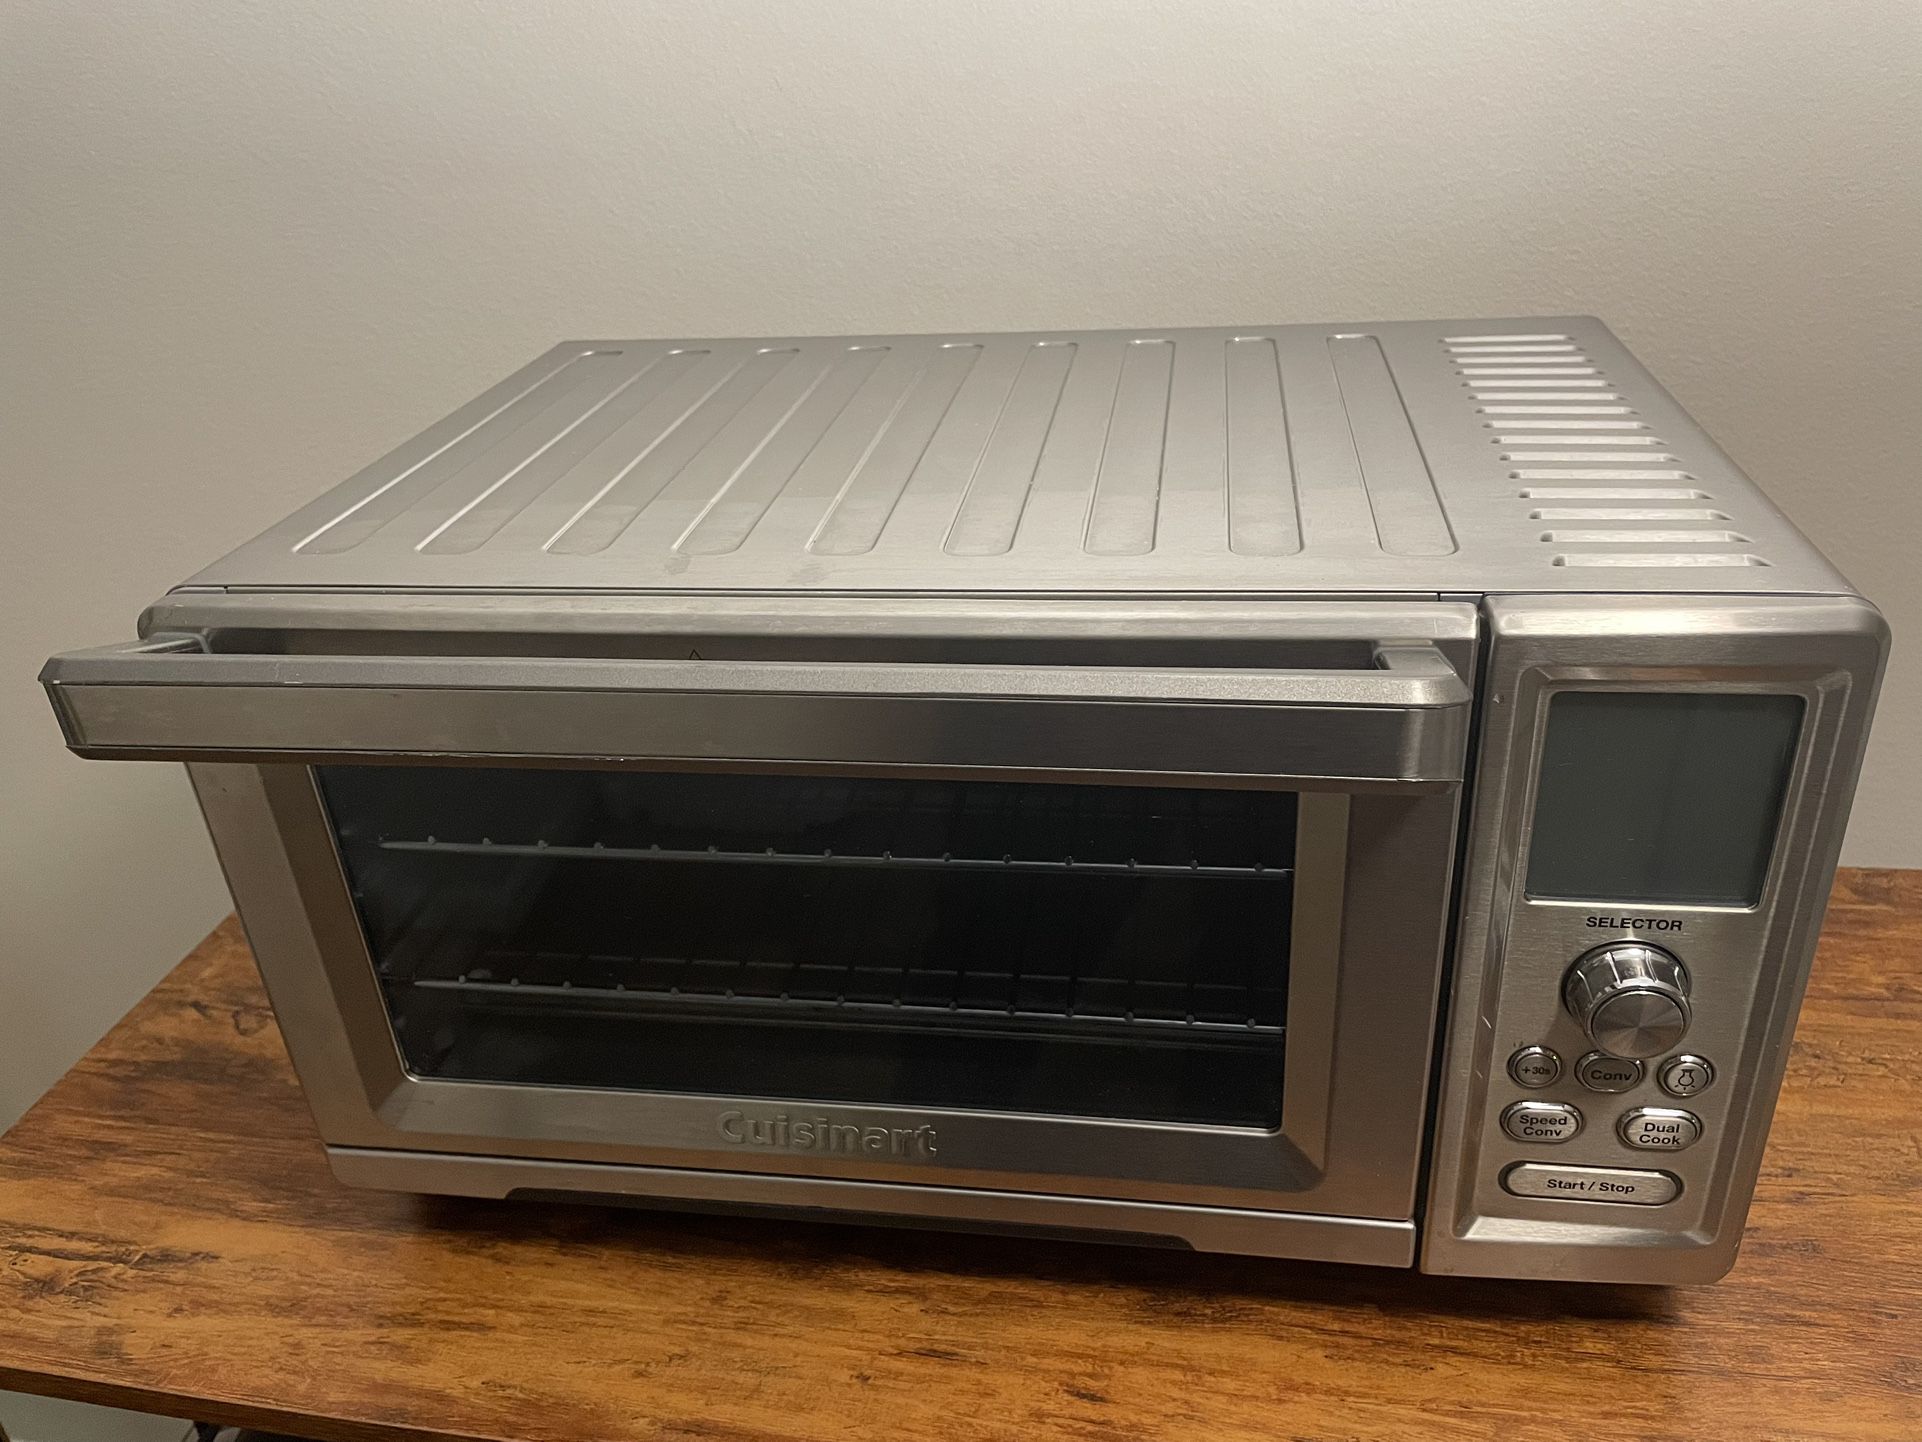 Cuisinart Chef's Convection Toaster Oven, 20.87"(L) x 16.93"(W) x 11.42"(H), Stainless Steel